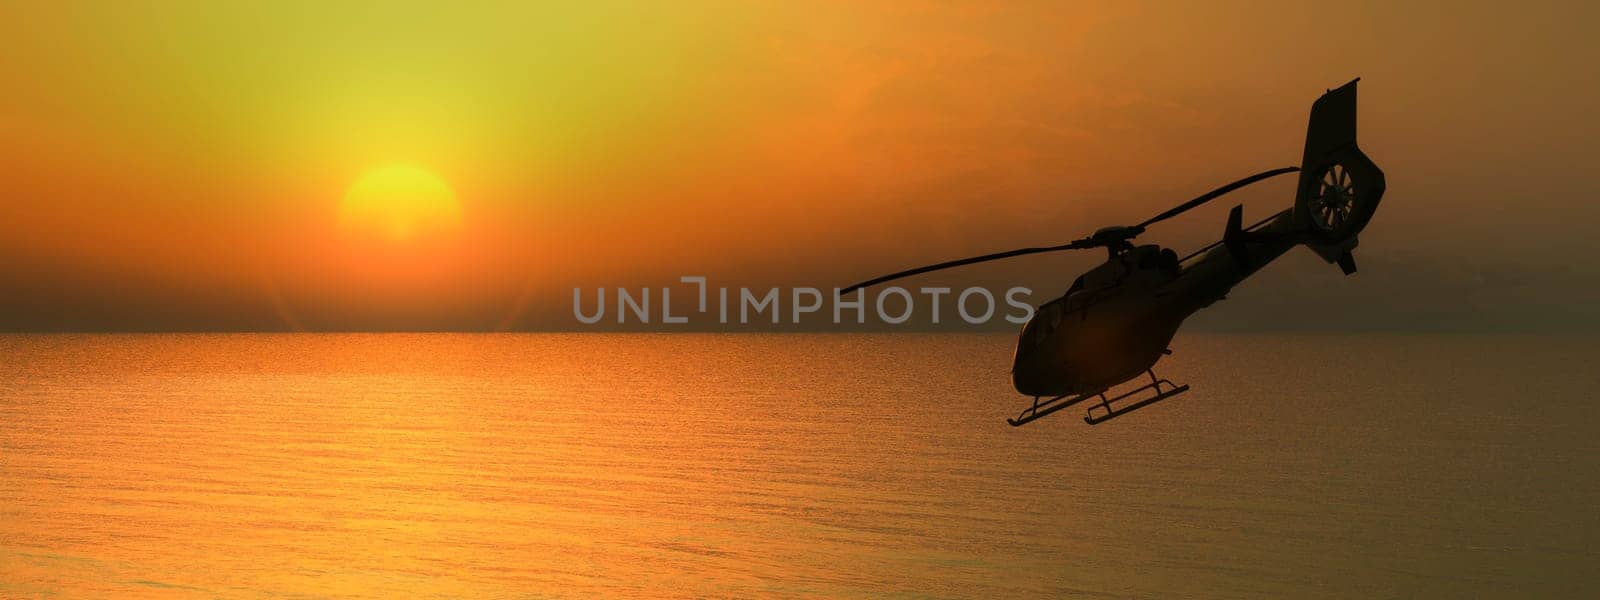 Twilight Flight: A Silhouetted Helicopter Soars over Calm Seas as the Sun Sets by Juanjo39